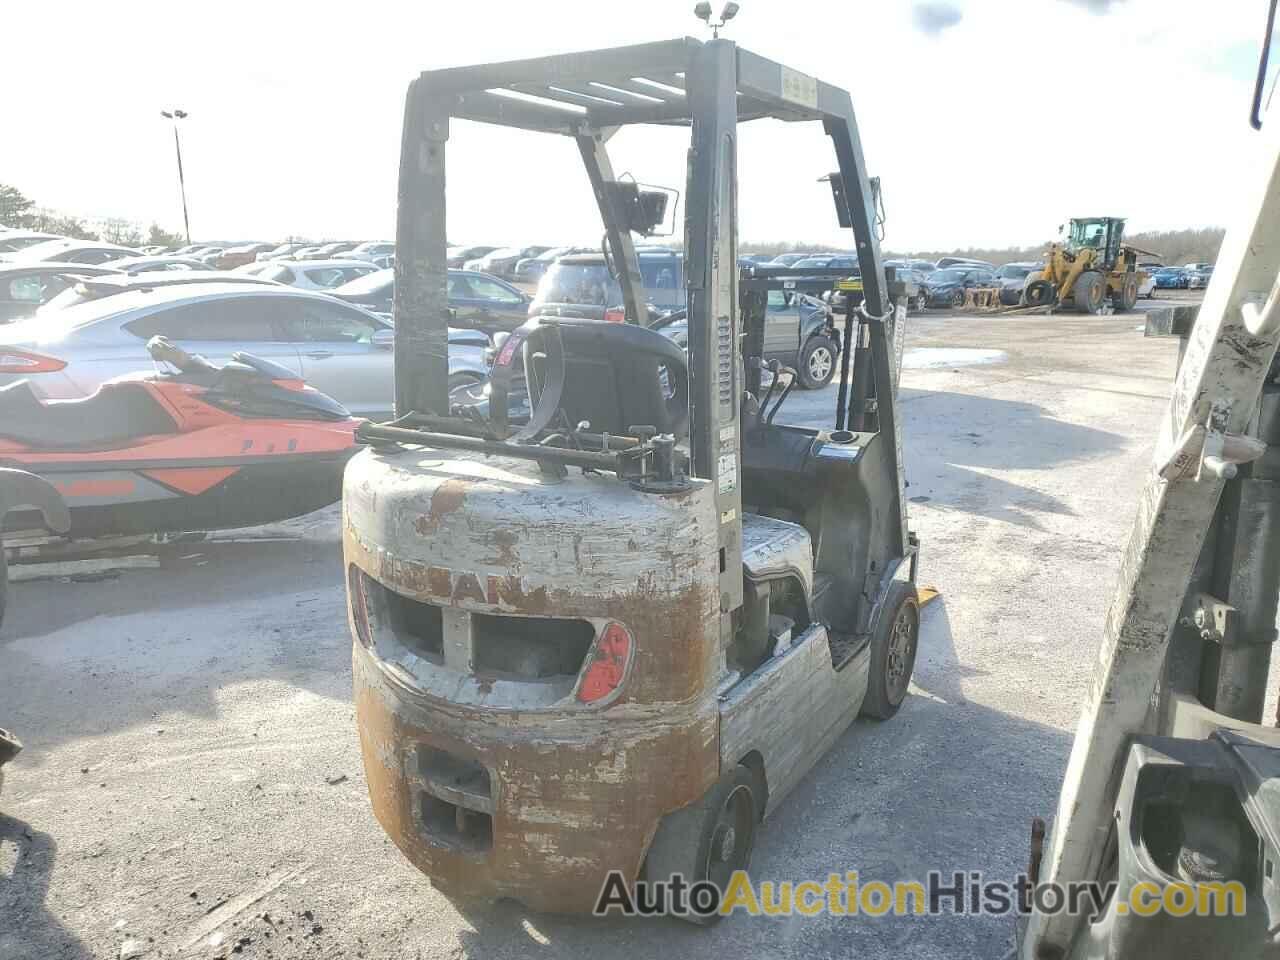 NISSAN FORKLIFT, CP1F29P9683